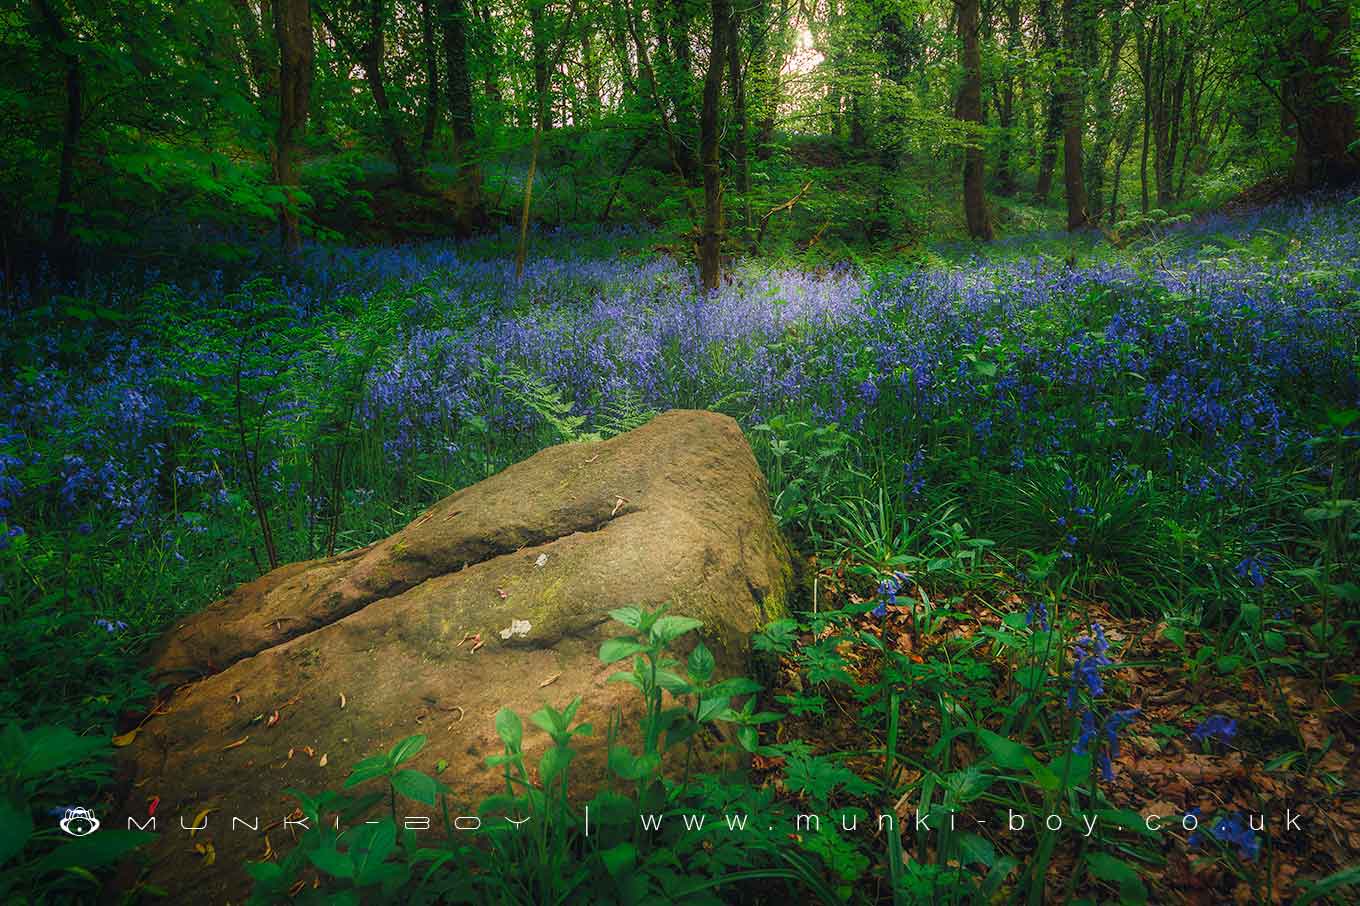 Bluebell Woods in Lancashire